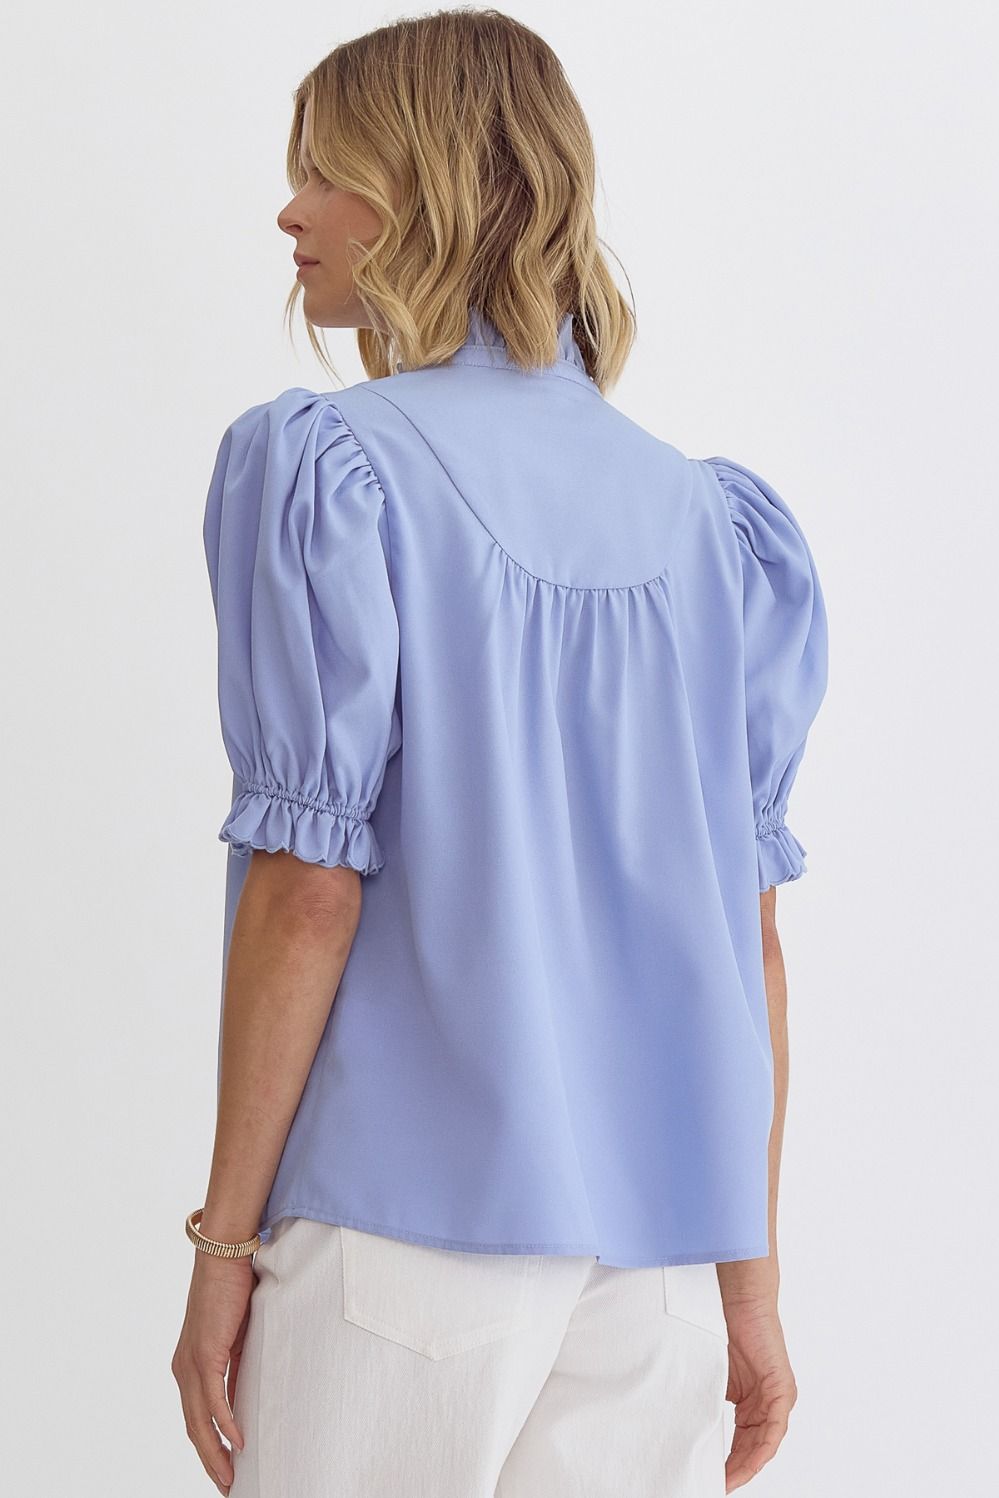 Entro | Puff Sleeve Light Blue Top | Sweetest Stitch Online Boutique